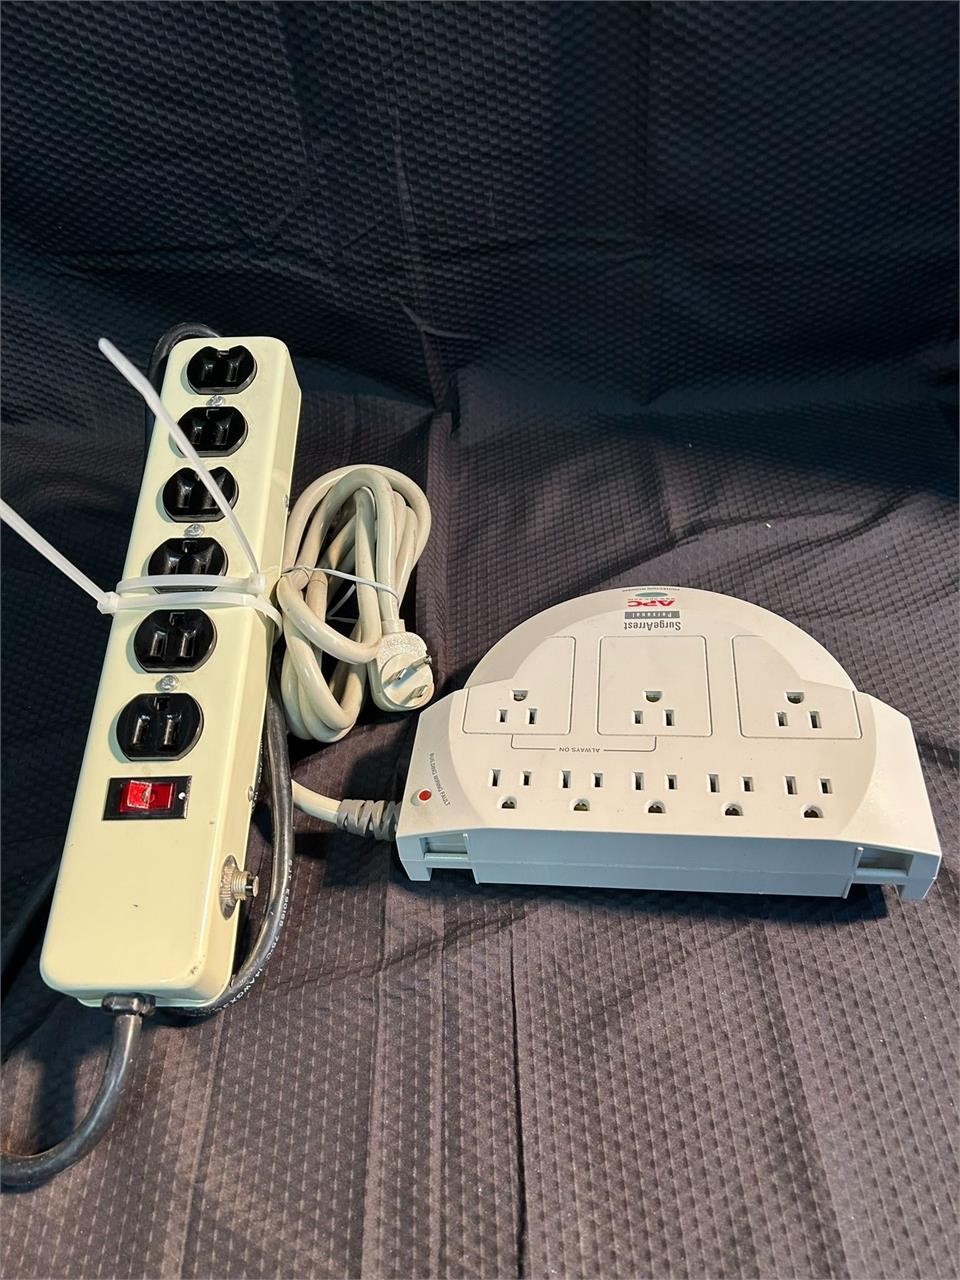 2 Multi Outlet Power Strips